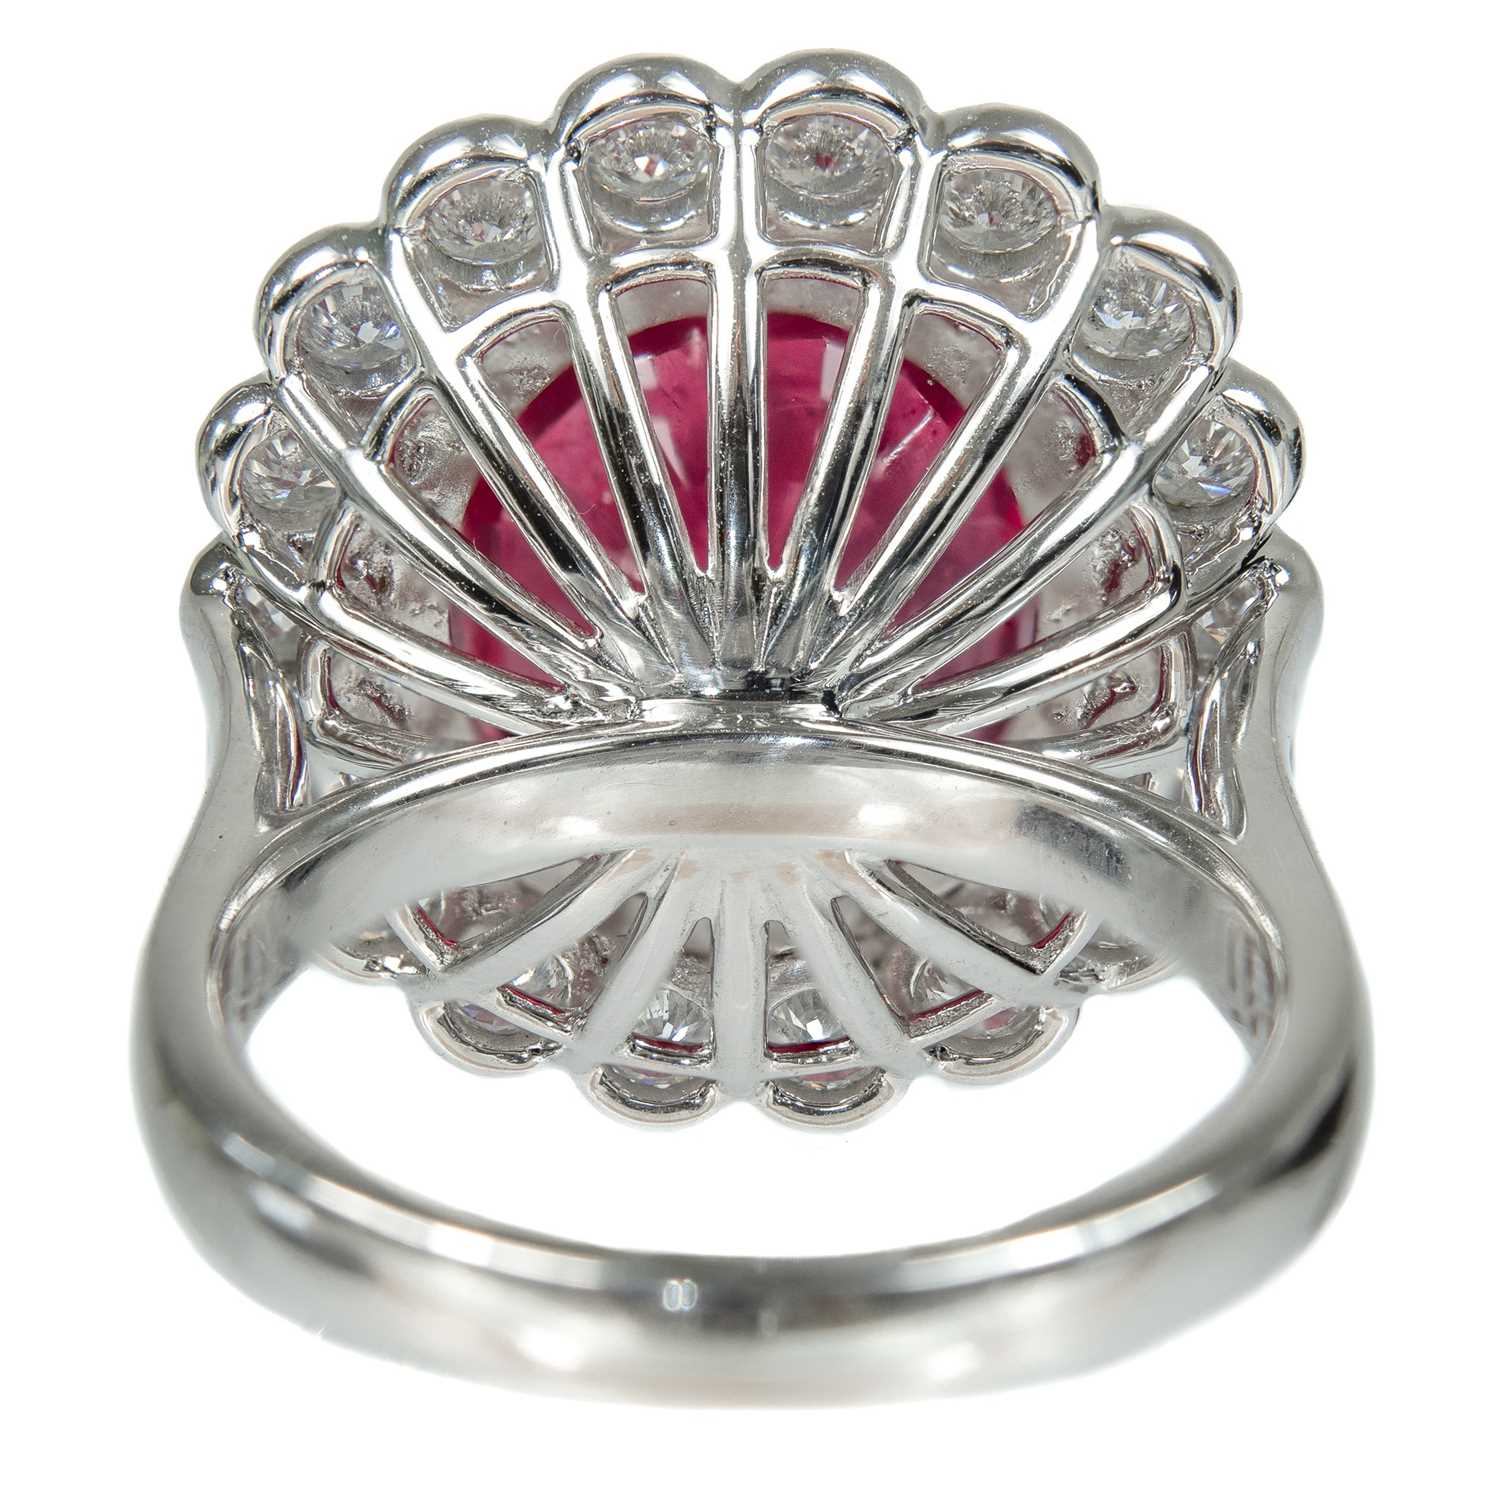 An impressive 18ct white gold, 14.5ct (approx) ruby and diamond cluster dress ring. - Image 4 of 8